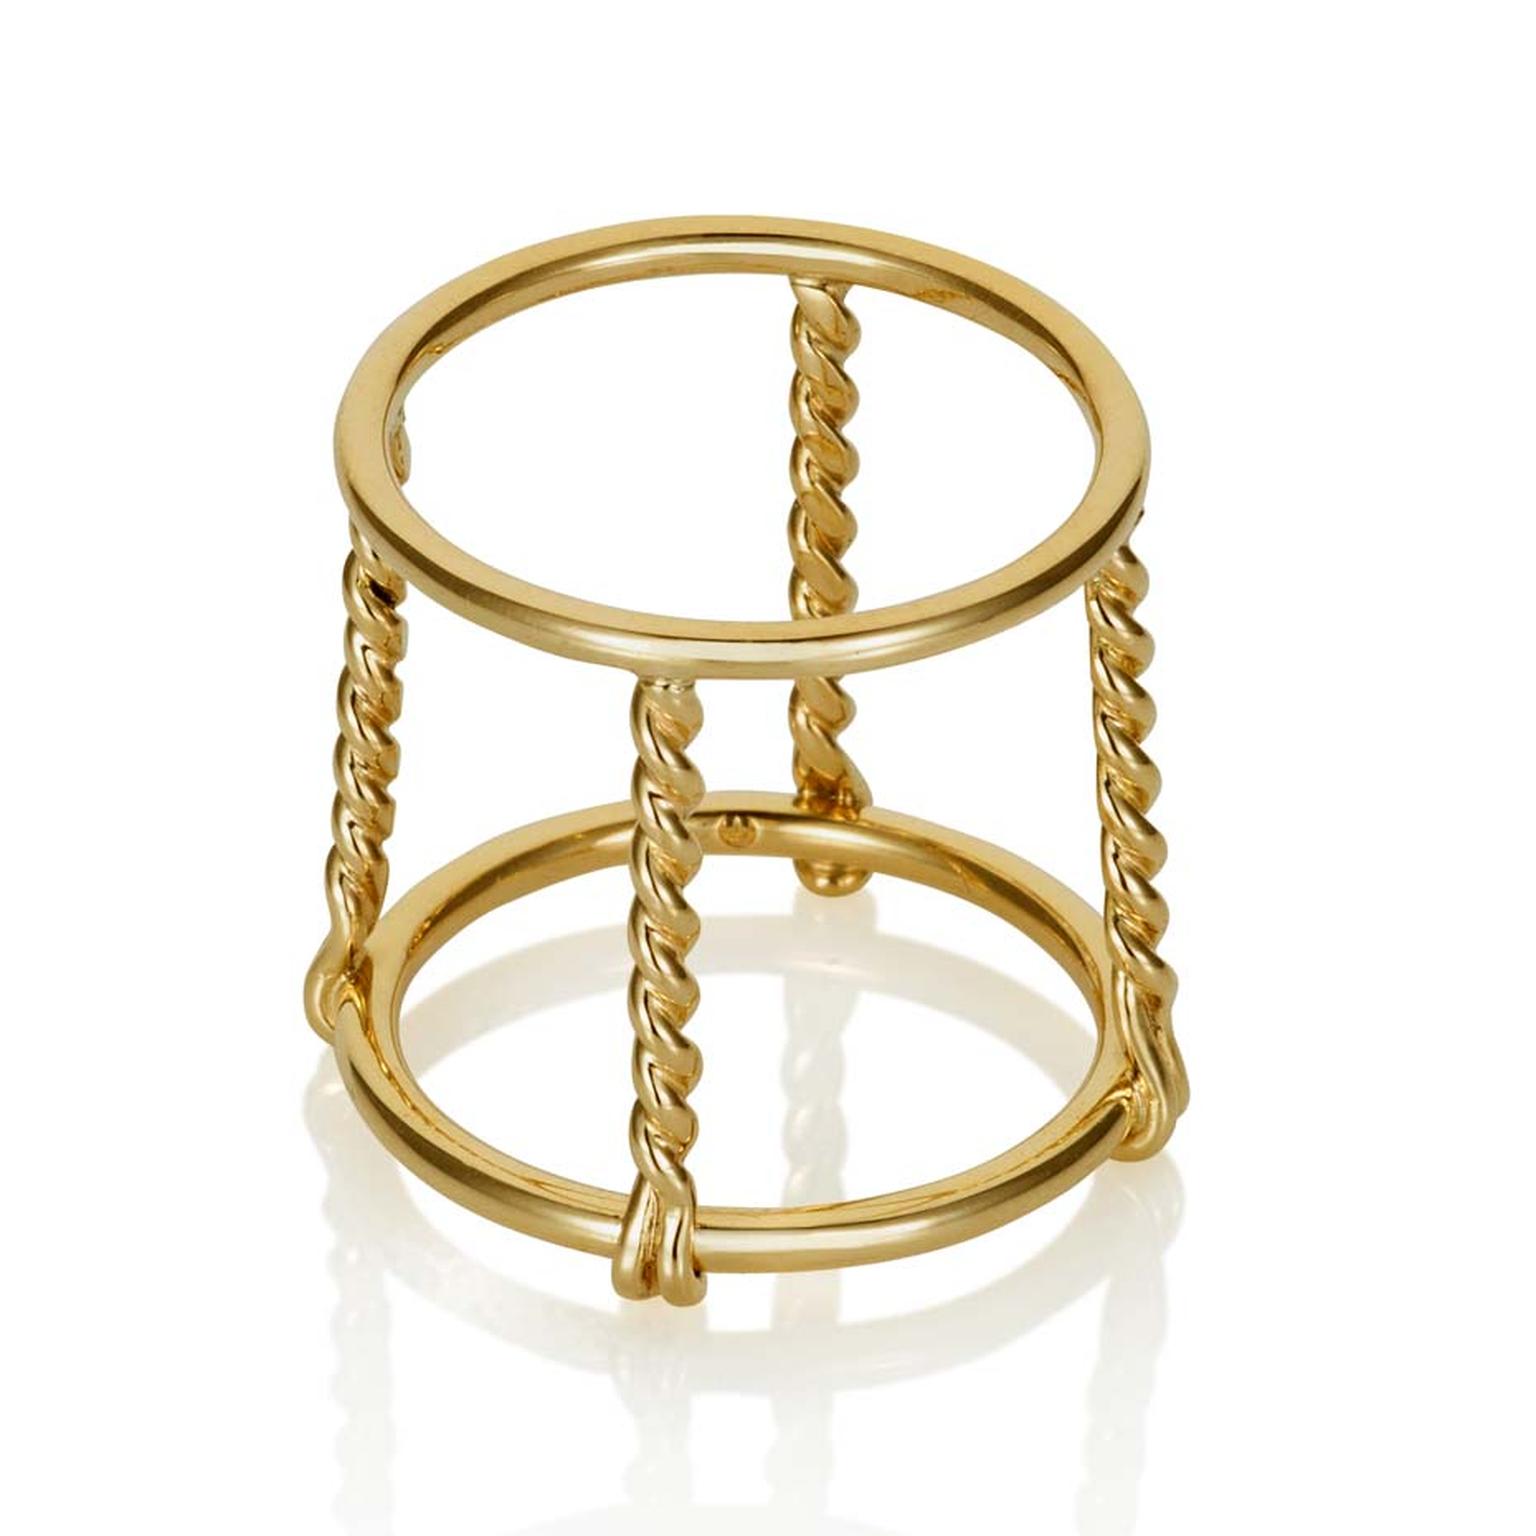 Coléoptère La Cage gold champagne ring. Available from Stone & Strand ($2,250).